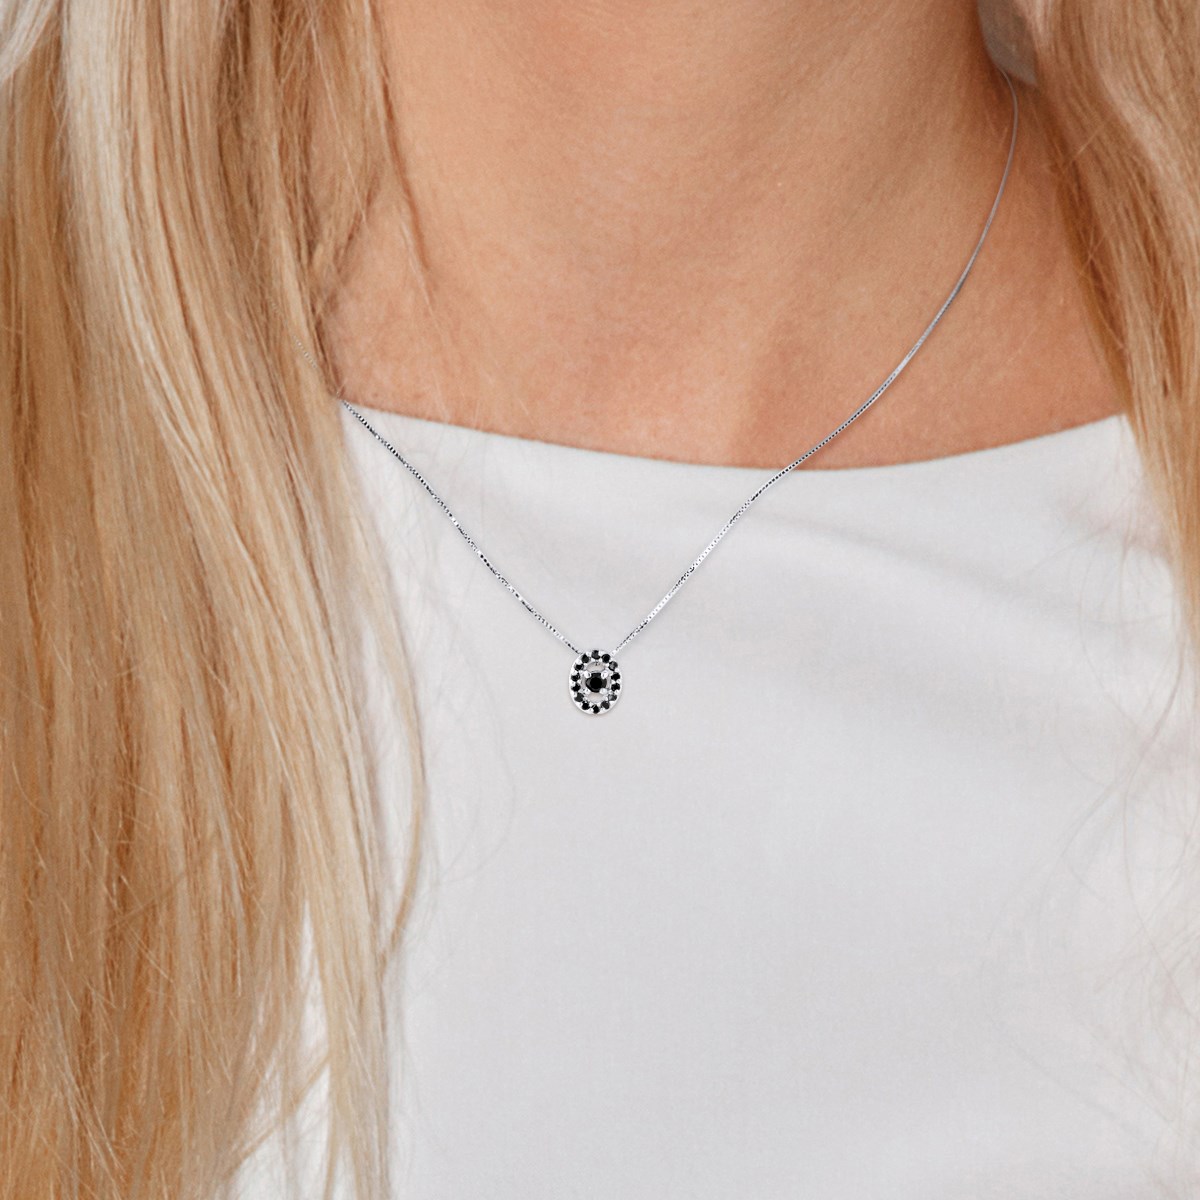 Collier Diamants Noirs 0,11 Cts Or Blanc - vue 2